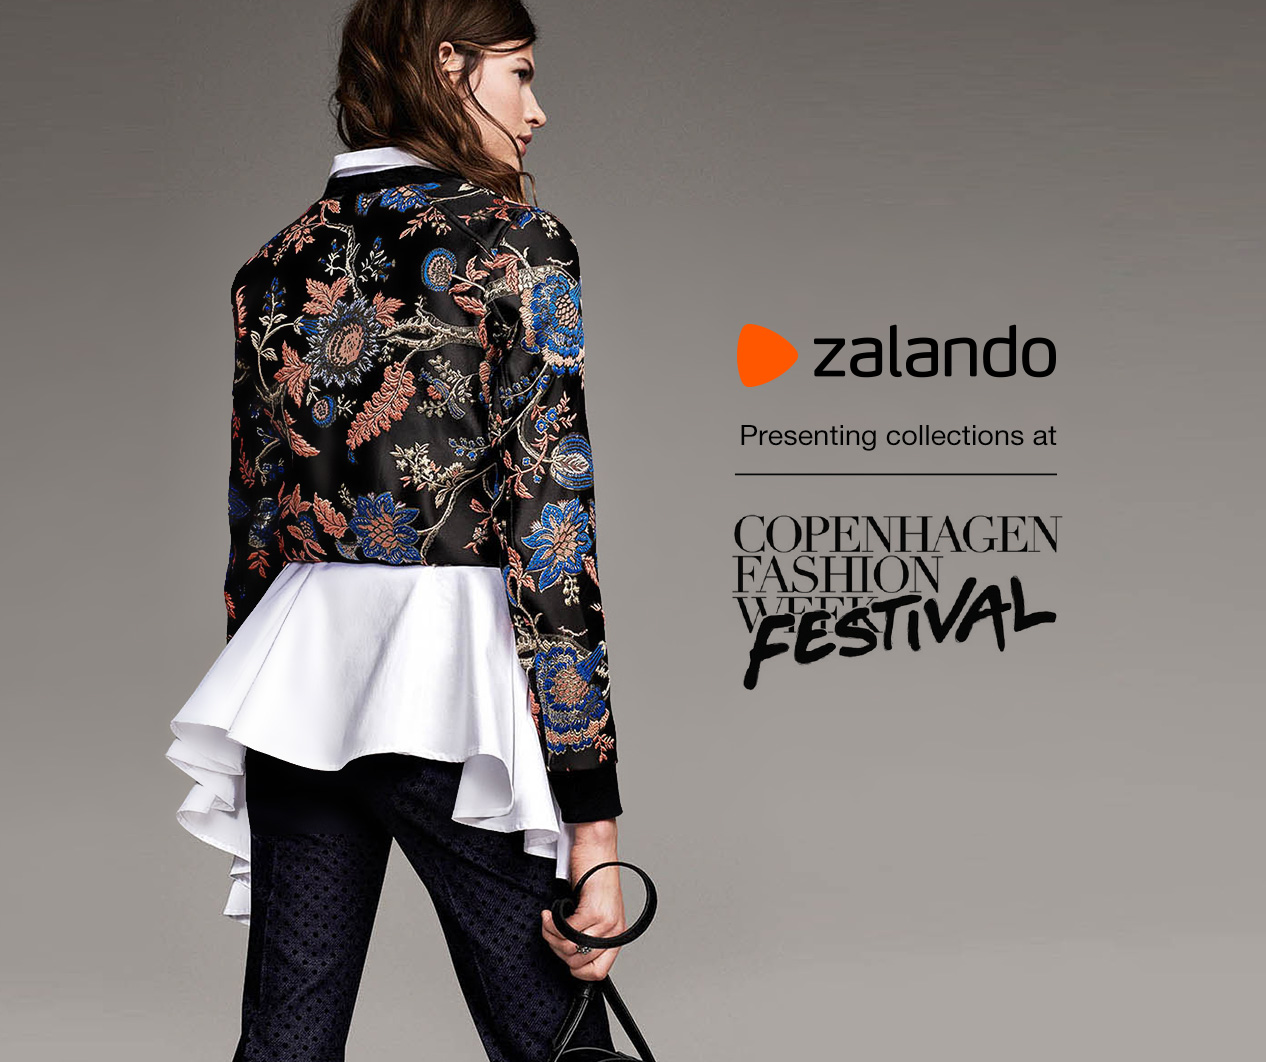 Zalando shows the future trends on a fashionshow the 11th of August 2016 in Copenhagen City hall.